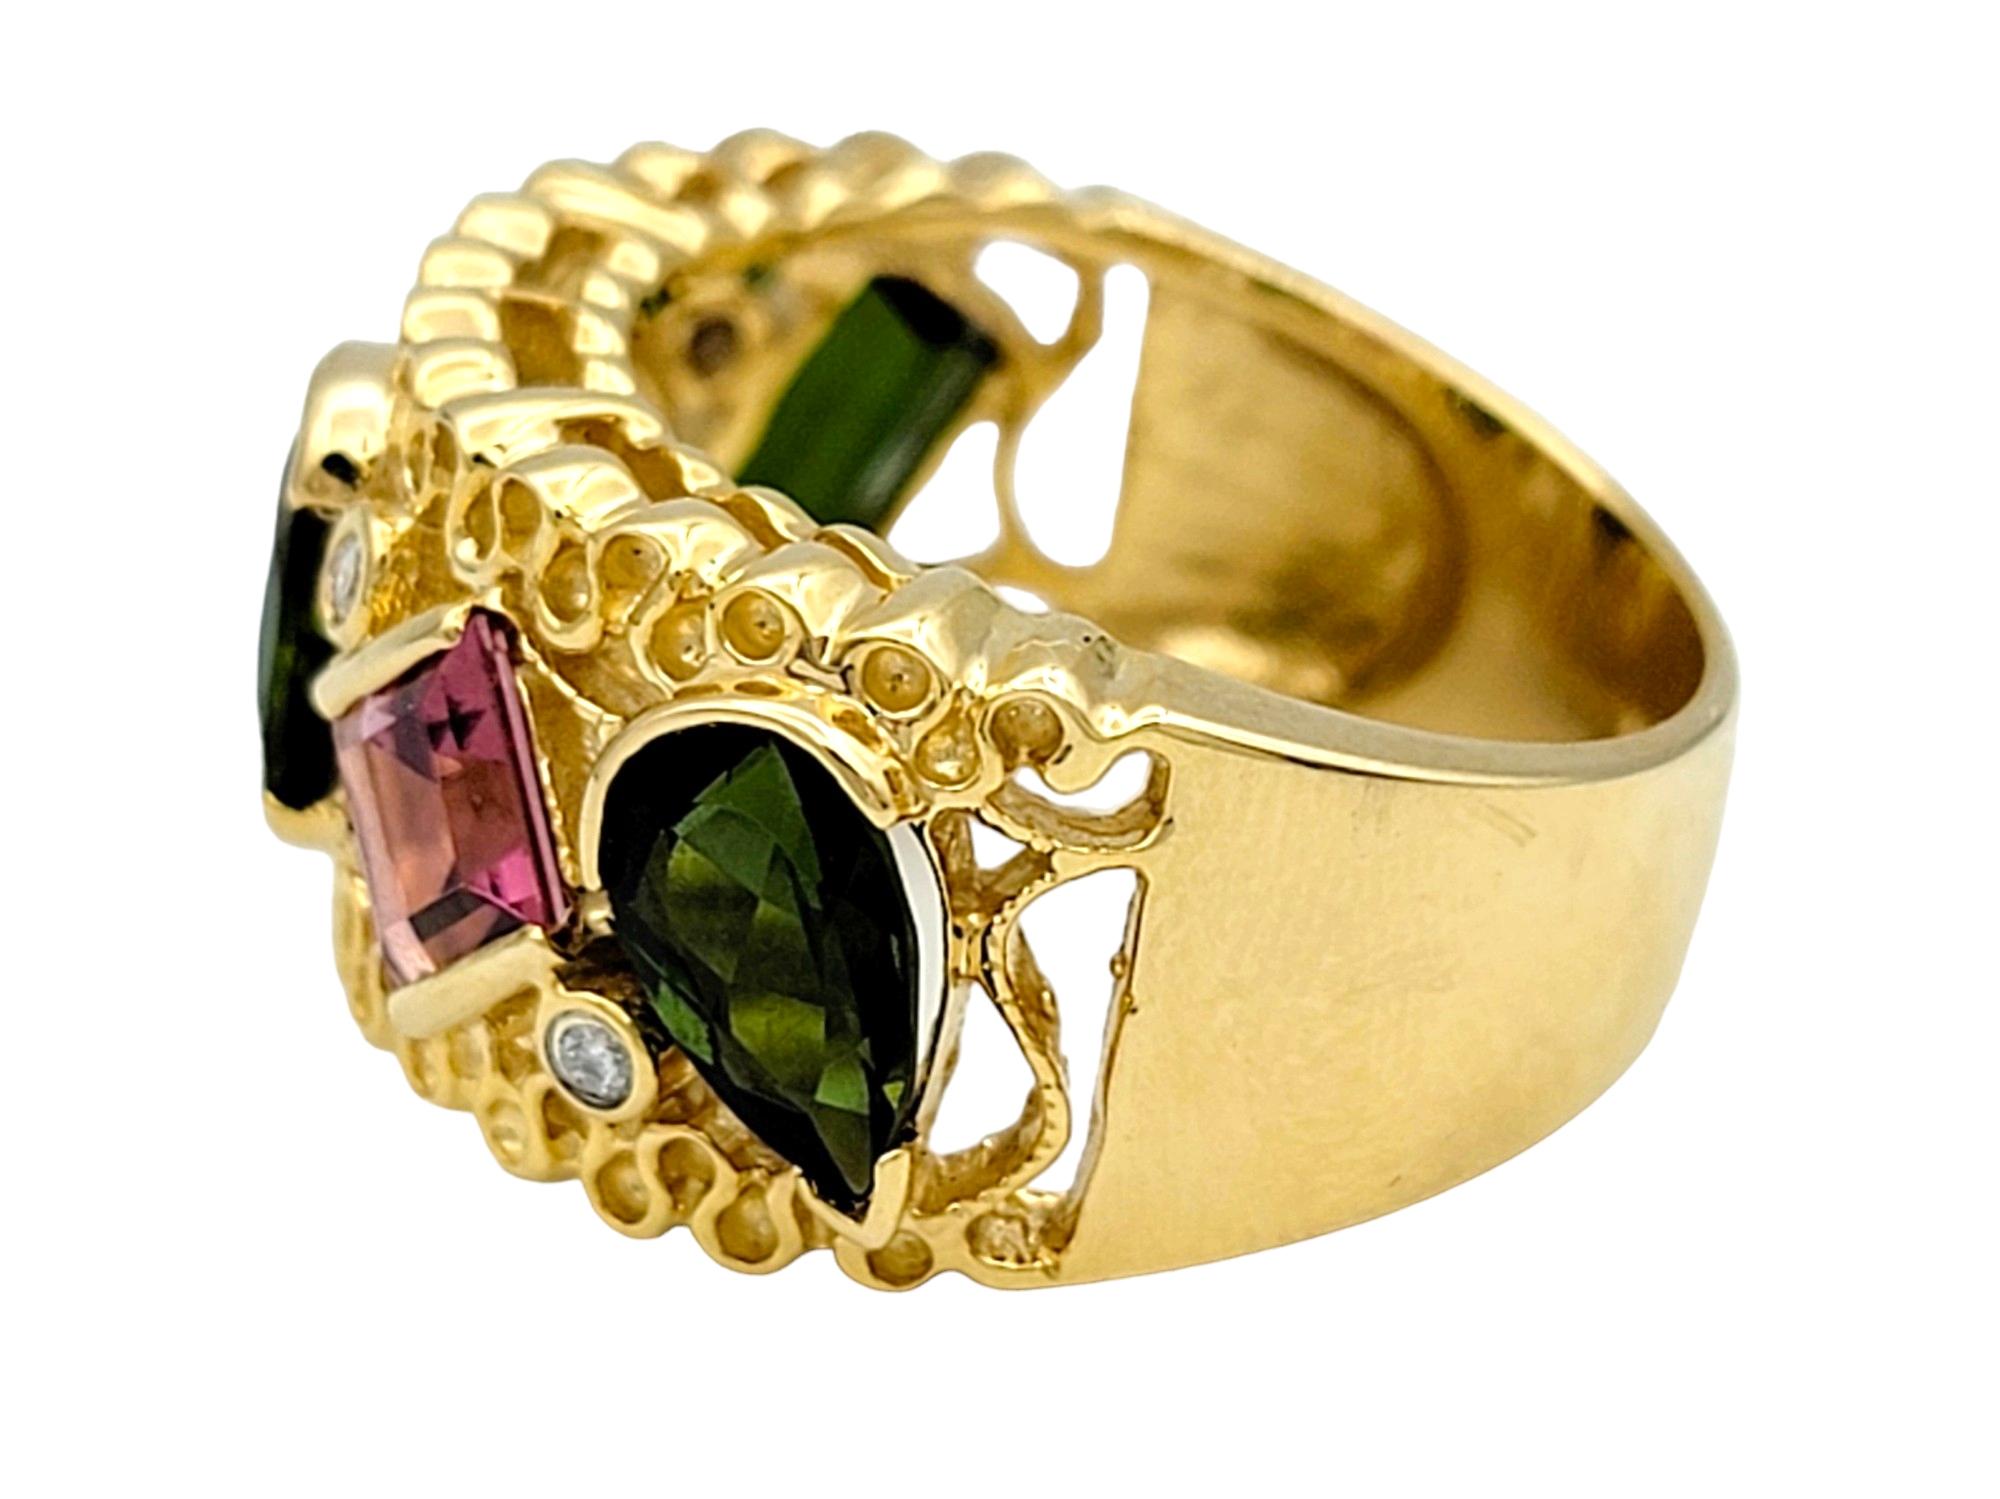 Multi-Cut Pink and Green Tourmaline Wide Band Ring Set in 14 Karat Yellow Gold In Good Condition For Sale In Scottsdale, AZ